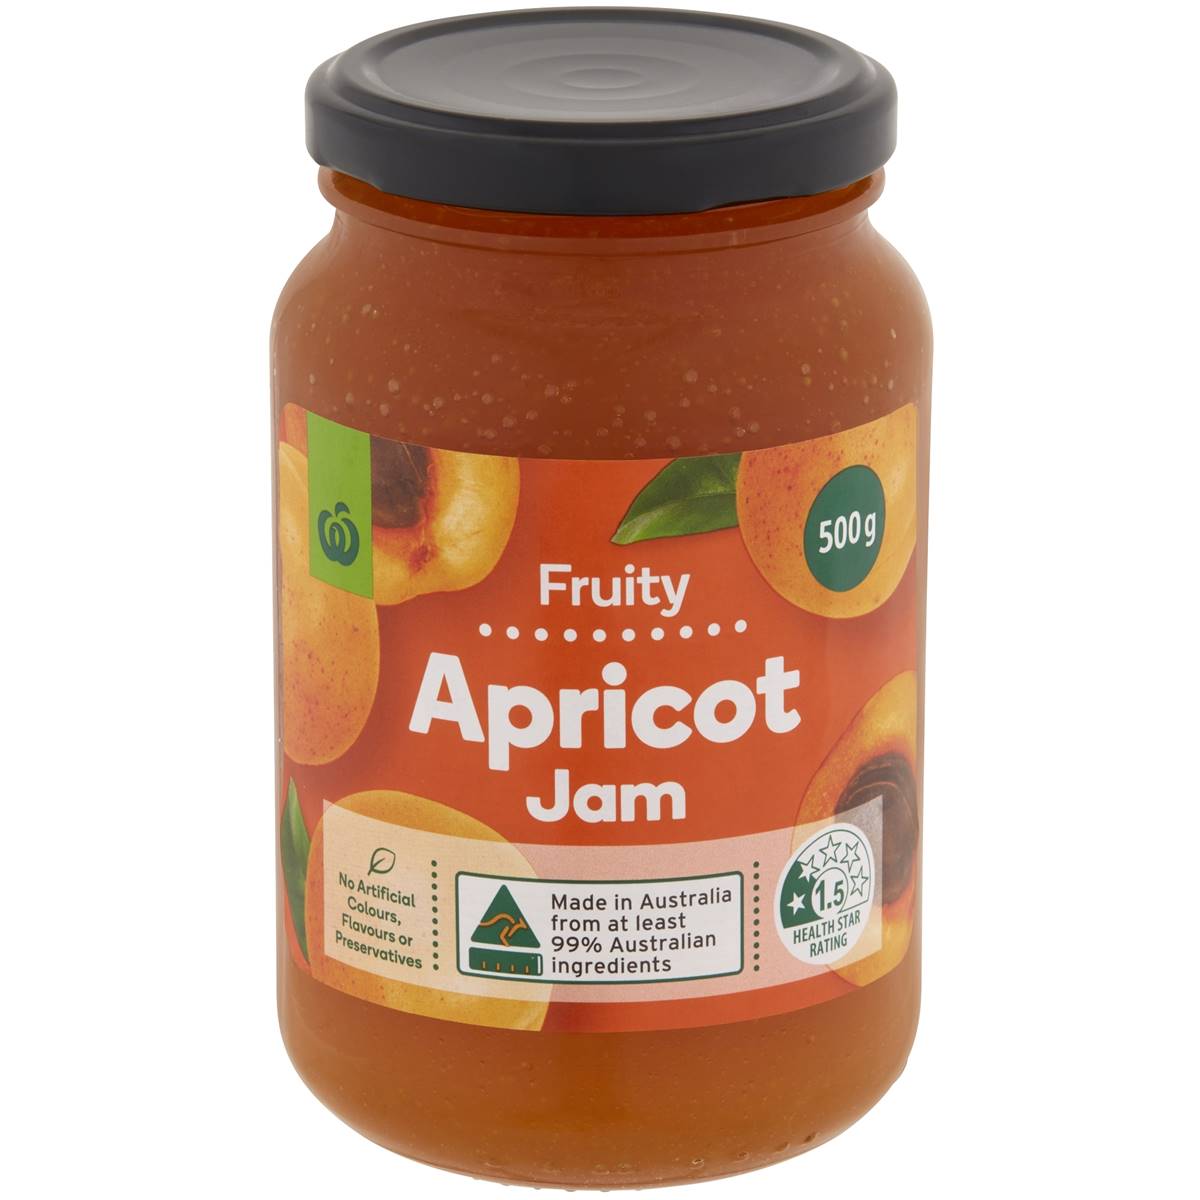 Calories in Woolworths Apricot Jam